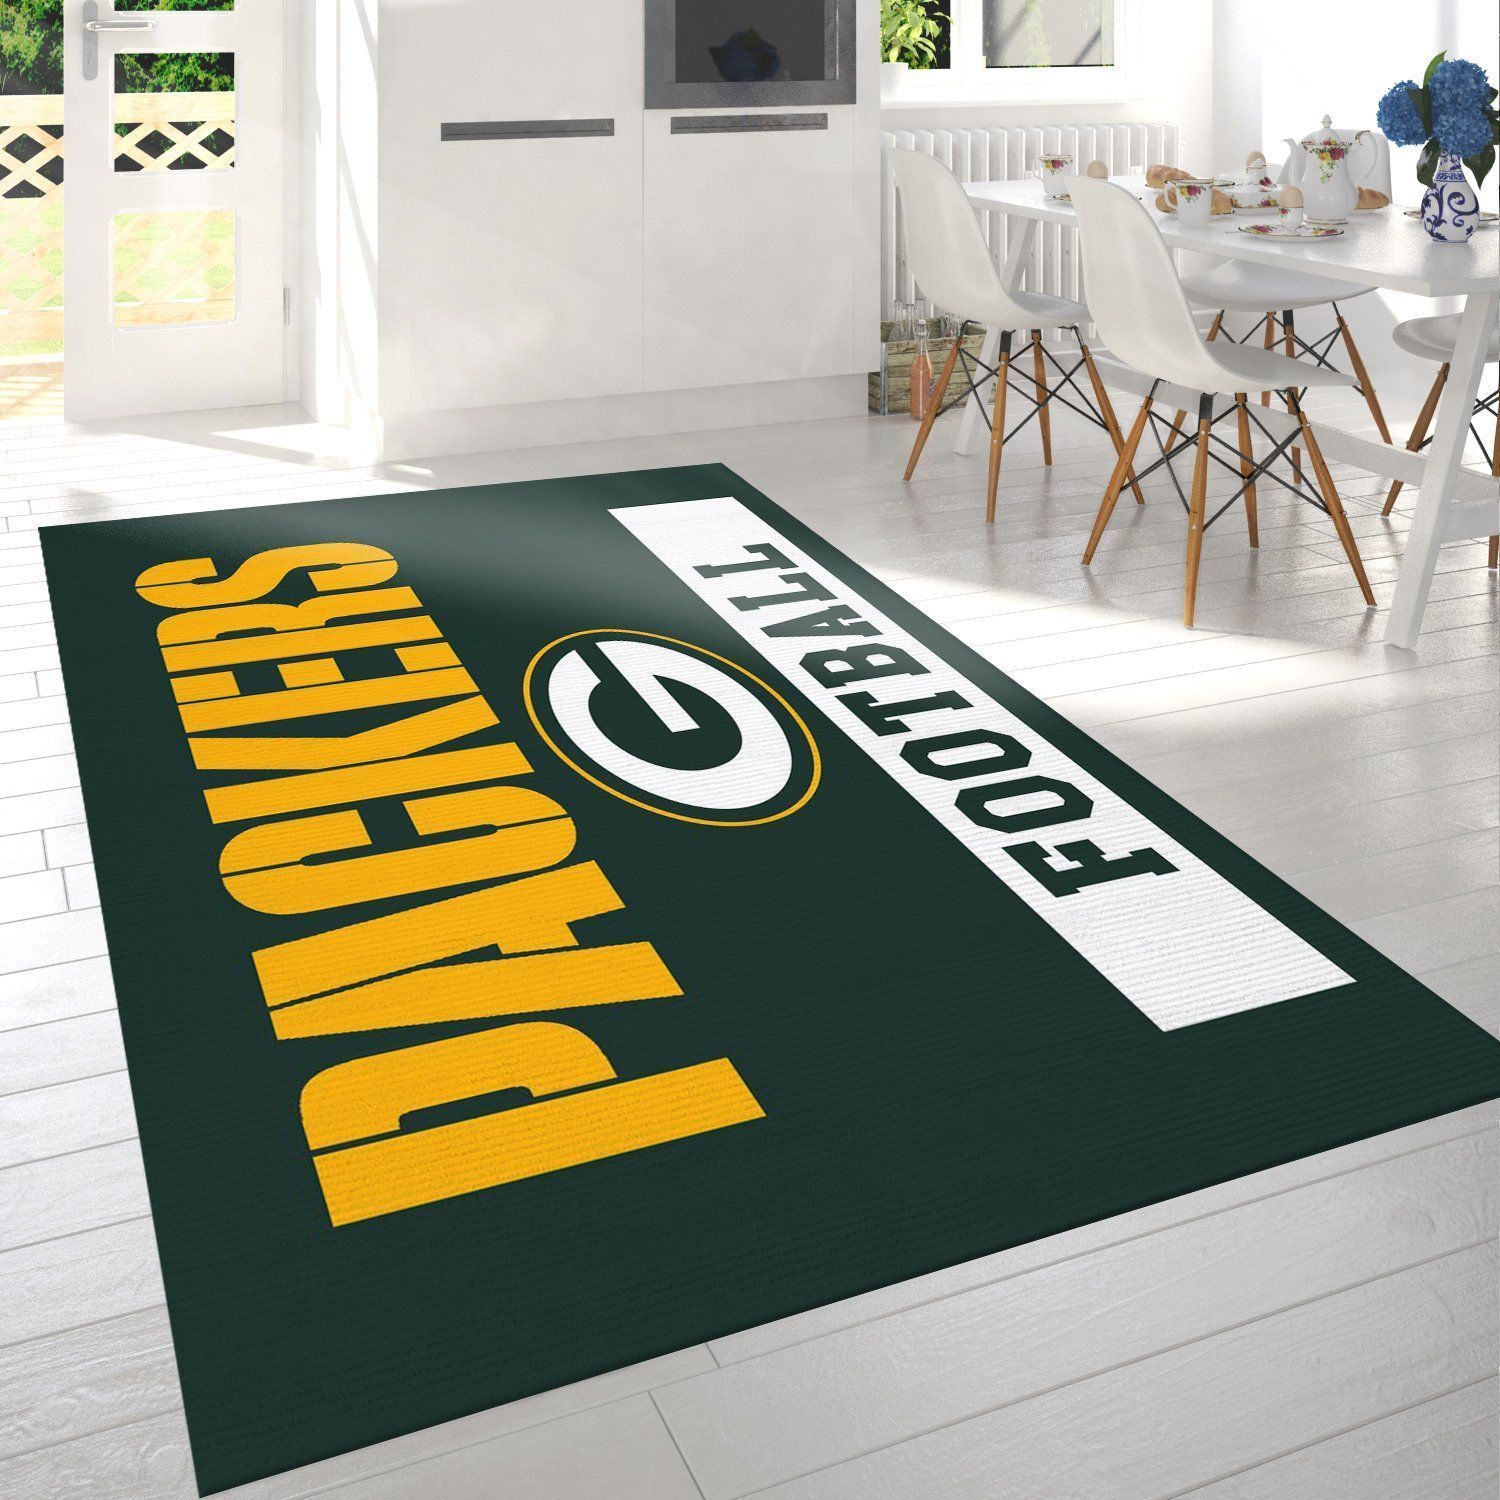 Green Bay Packers Football Nfl Logo Area Rug For Gift Bedroom Rug US Gift Decor - Indoor Outdoor Rugs